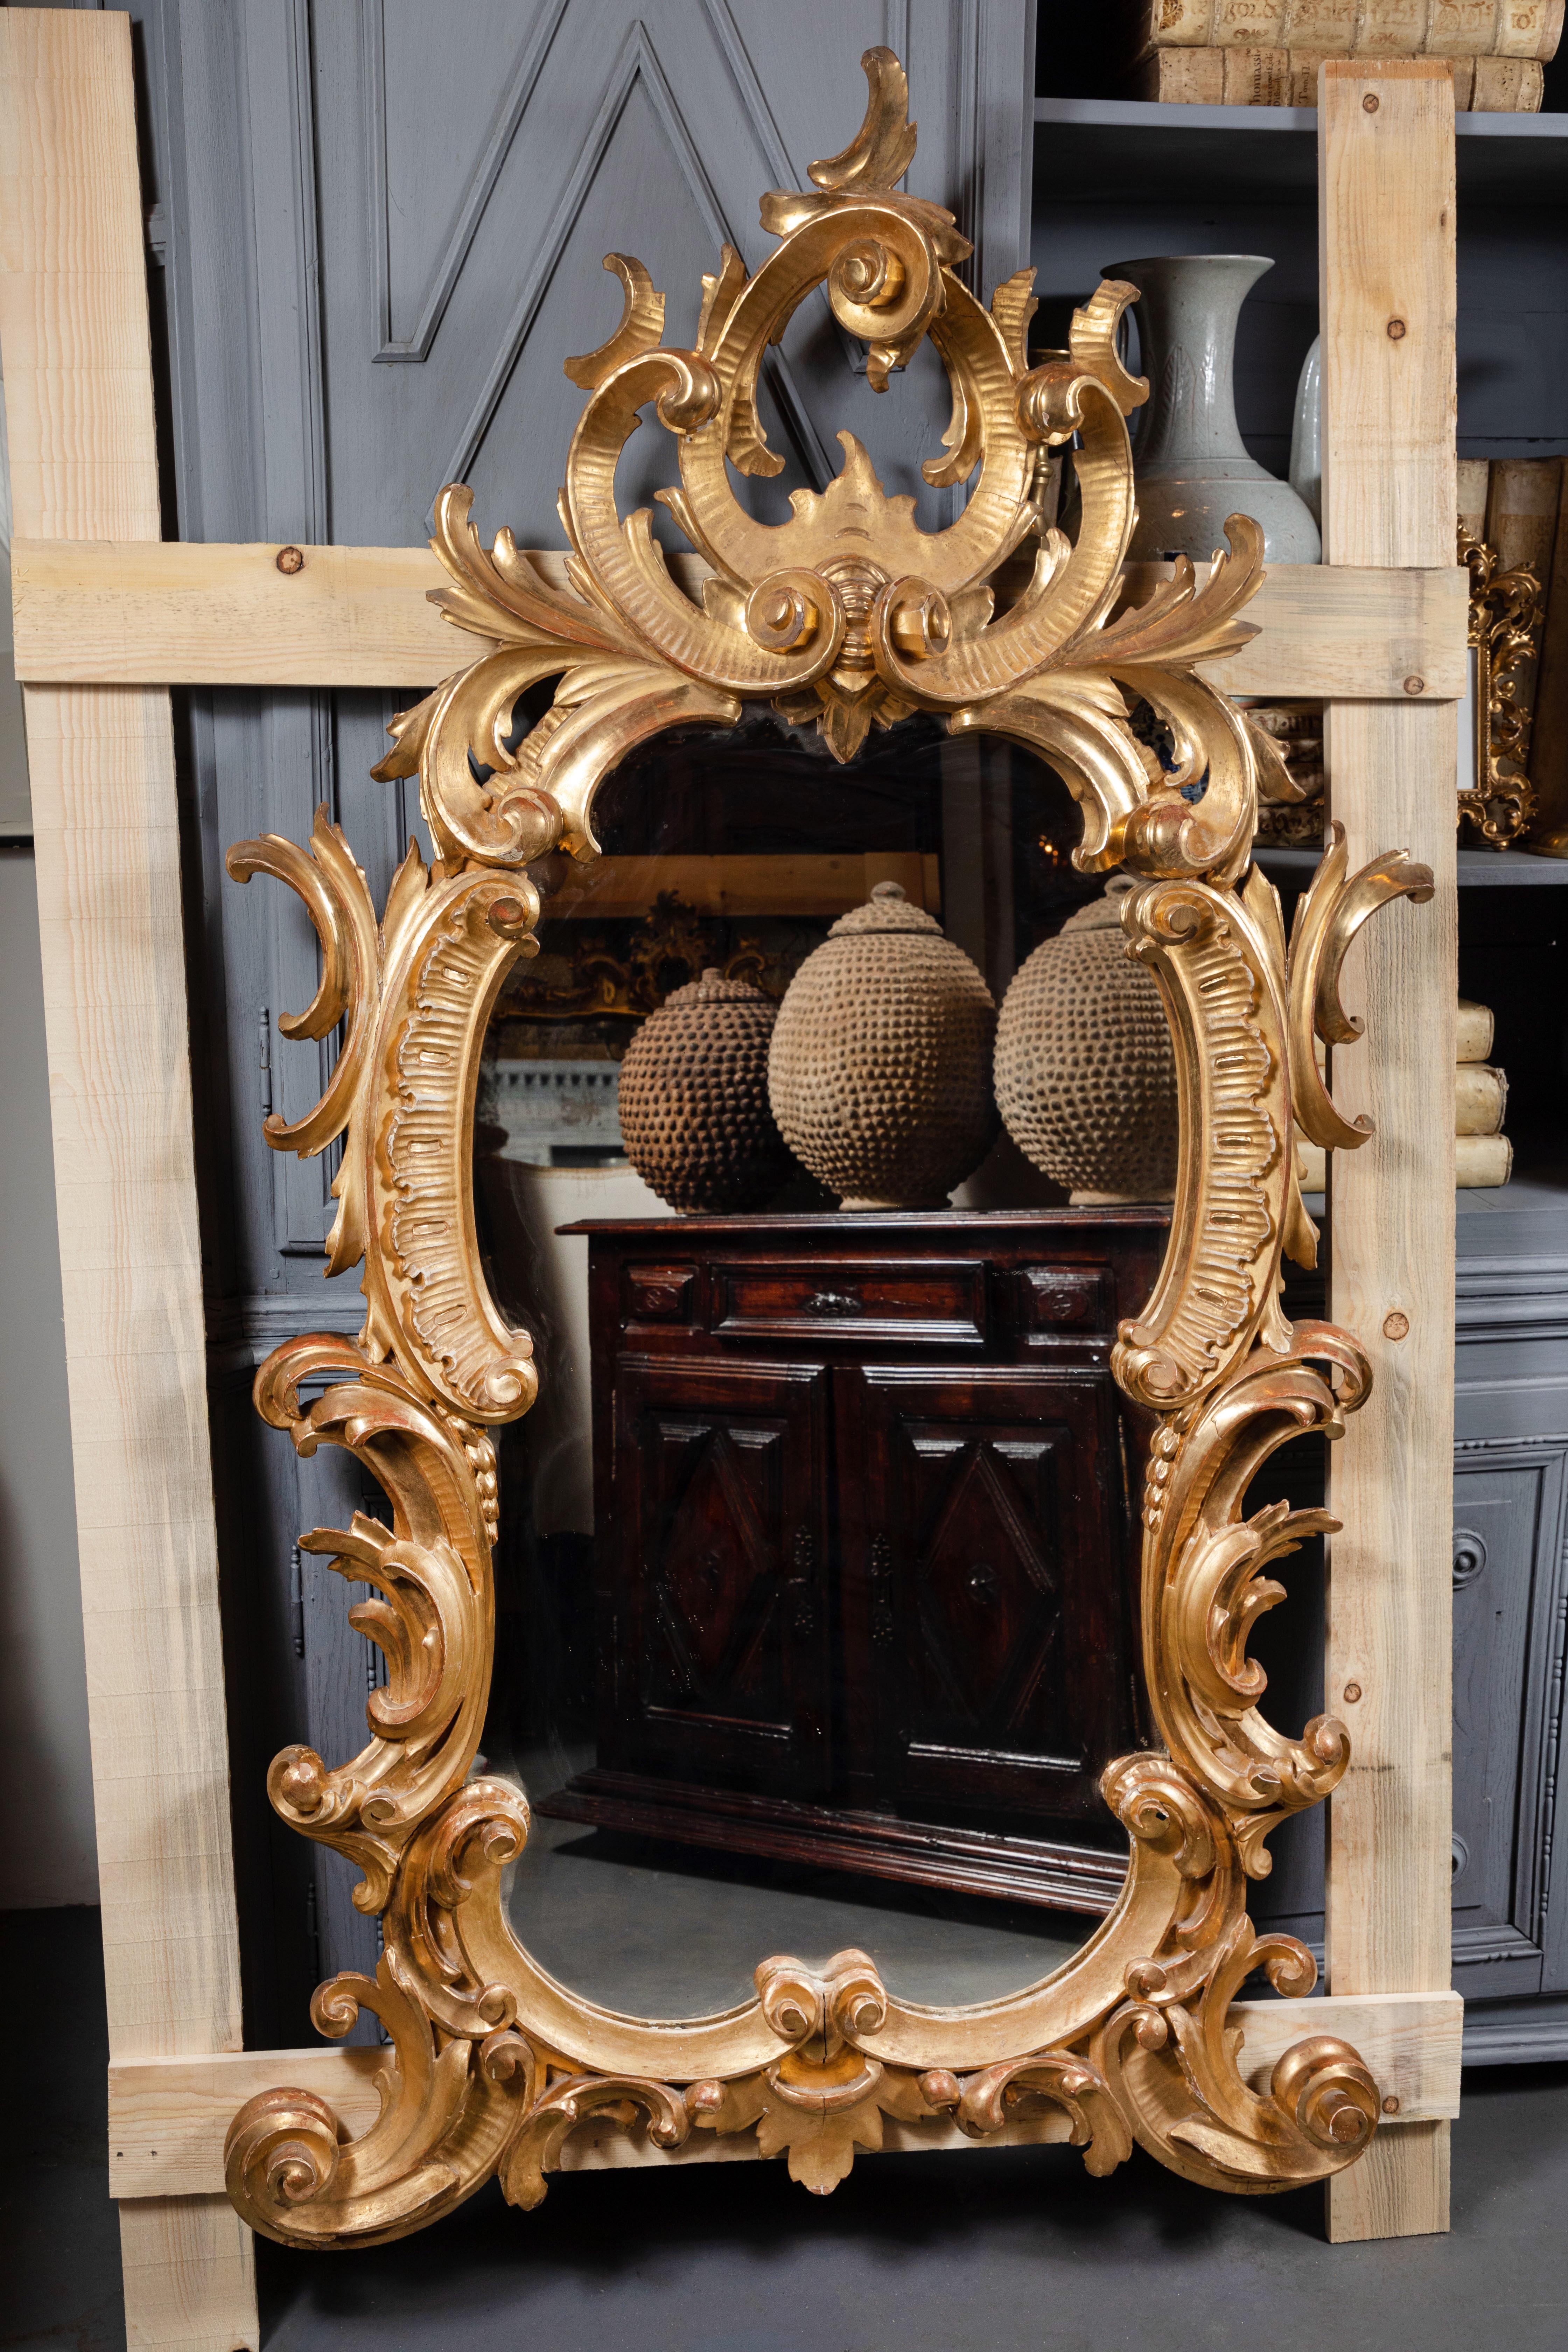 Large, circa 1880, hand carved, gessoed and 22k gold gilded scrolling frame inset with original glass mirror. Surmounted by a dramatic, pierced, foliate crown. From central Italy.